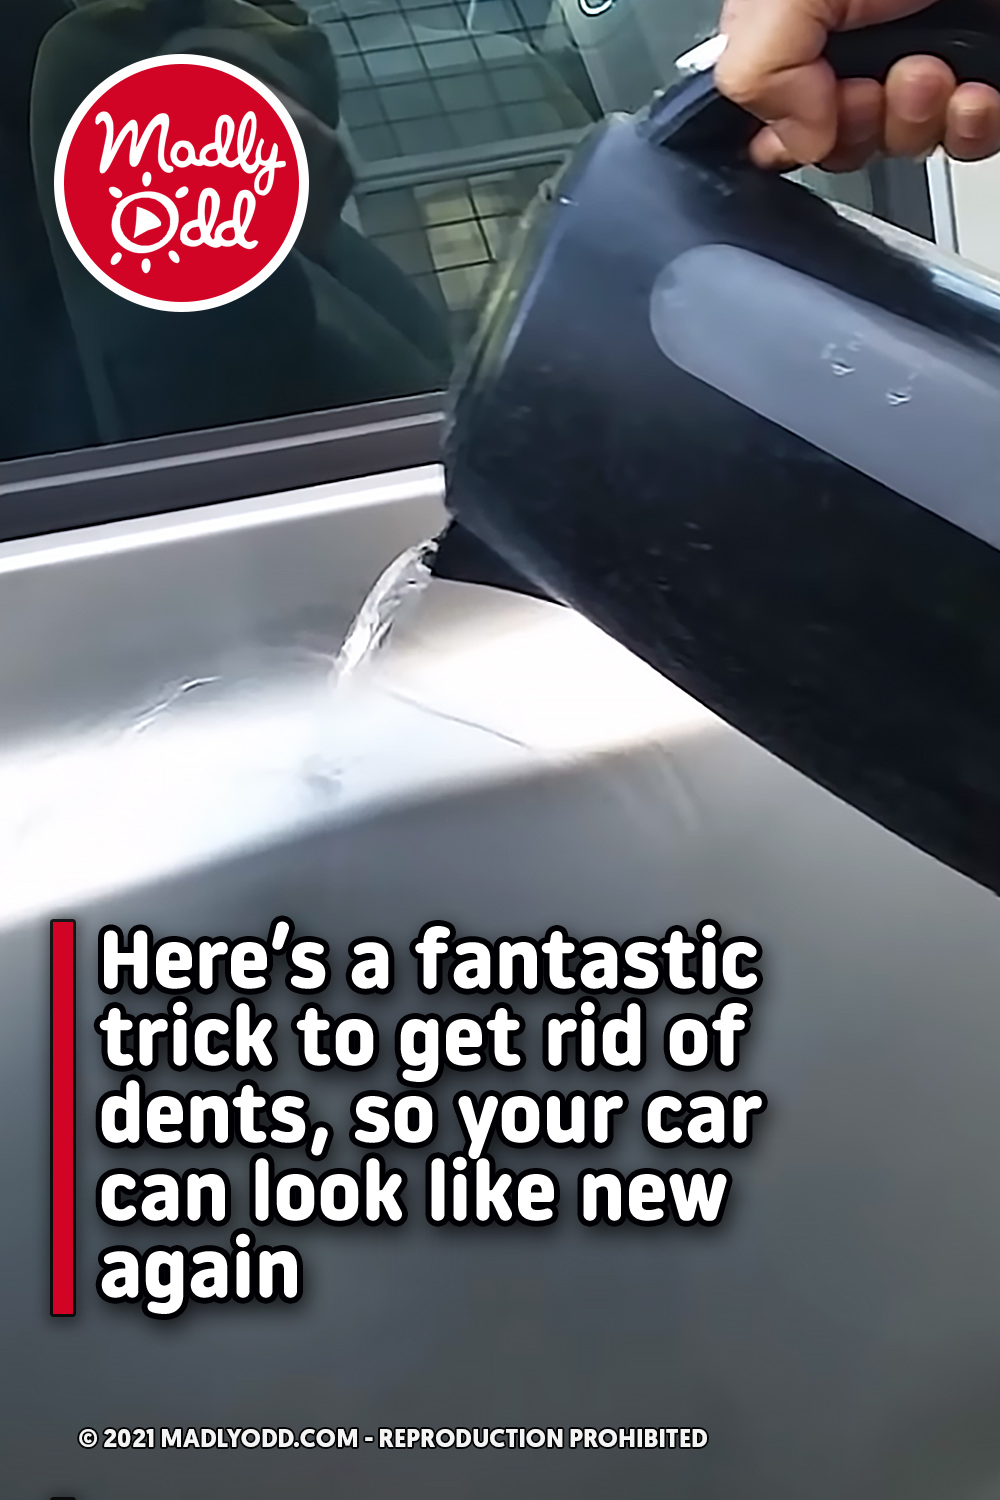 Here’s a fantastic trick to get rid of dents, so your car can look like new again